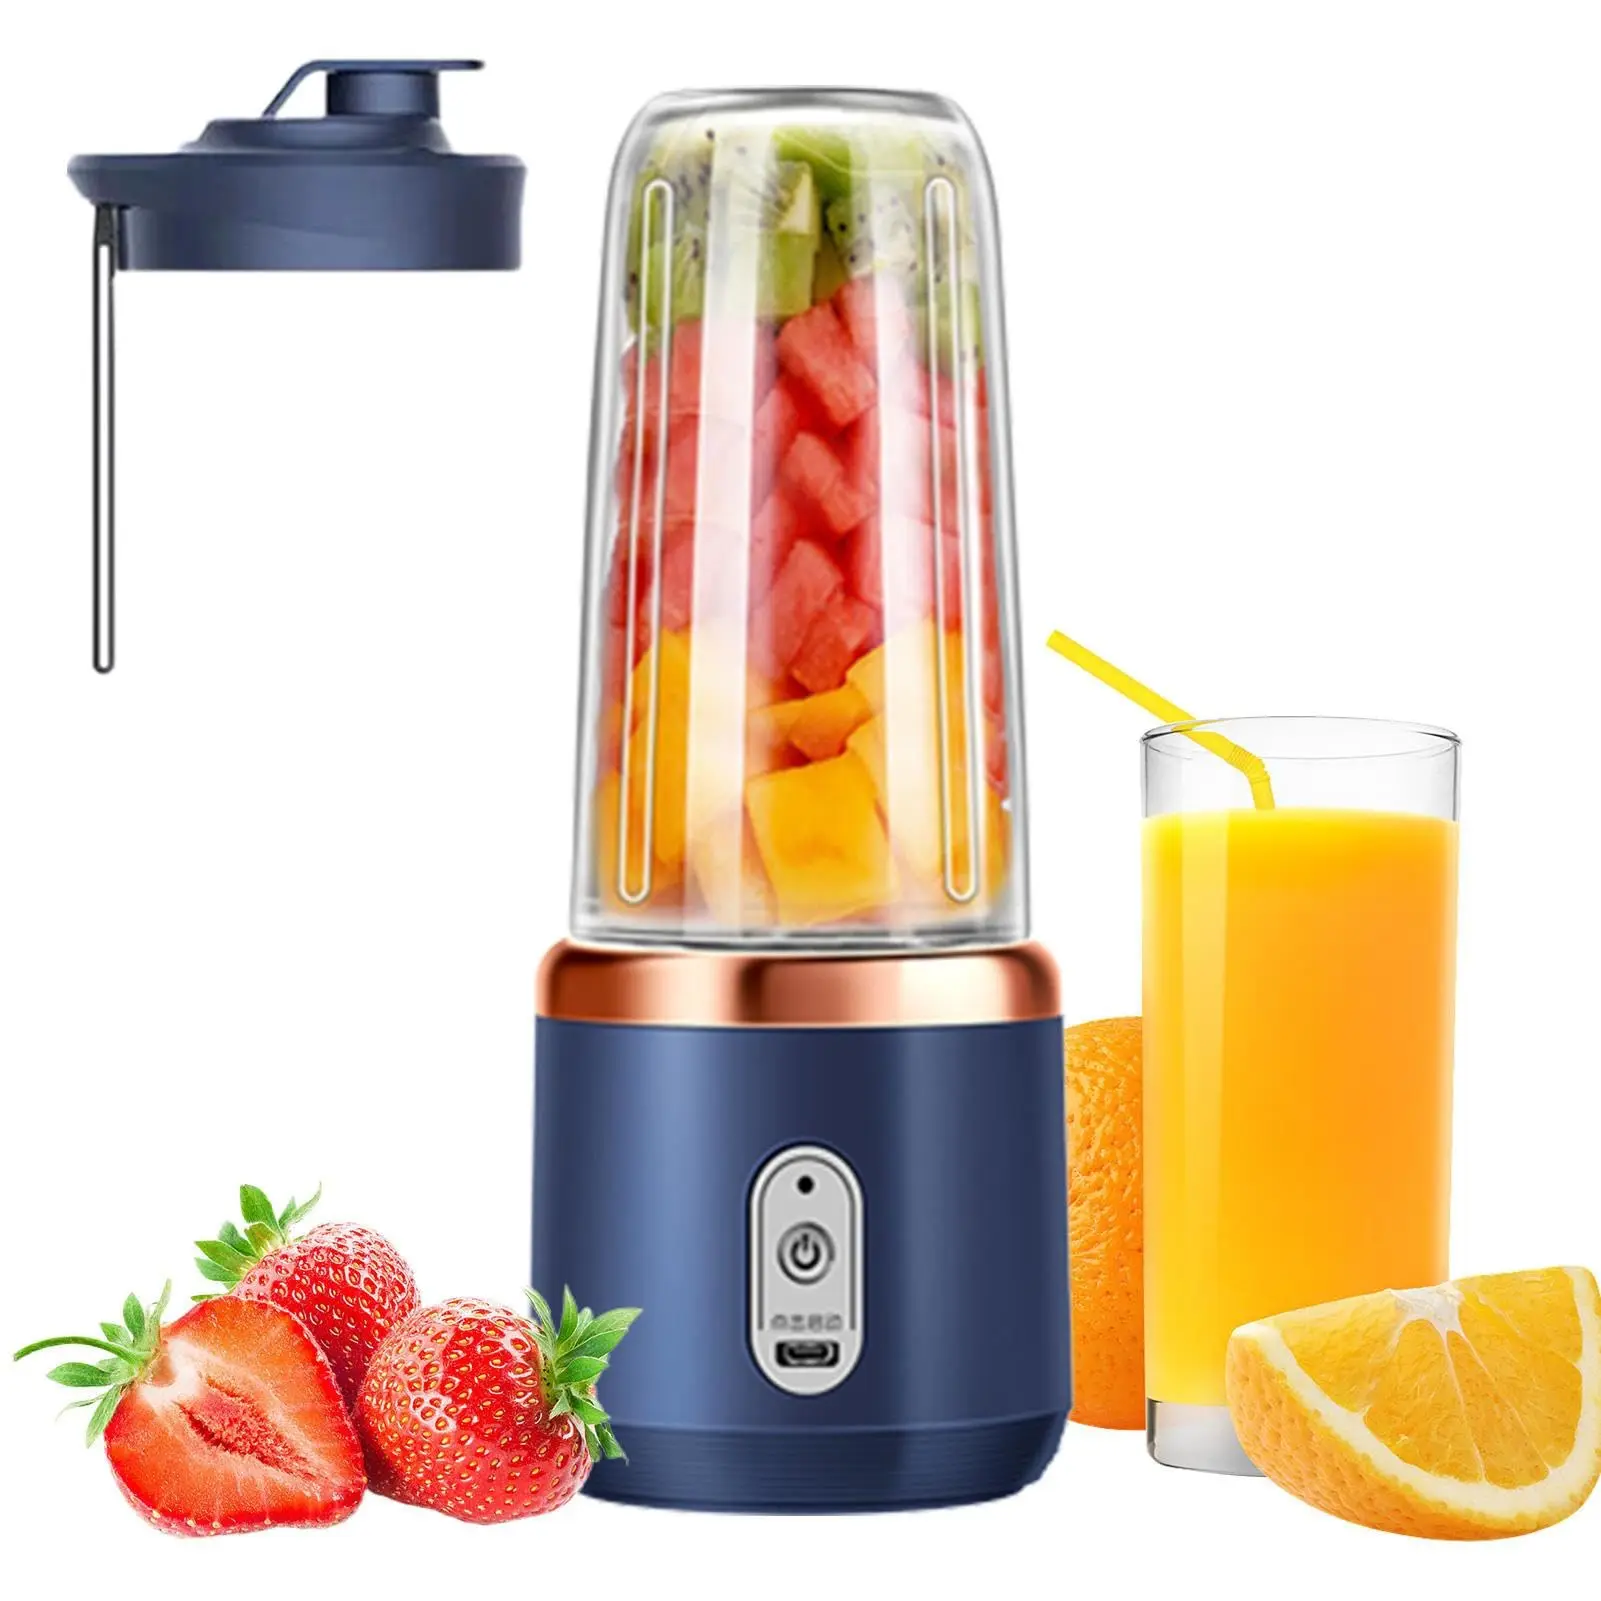 

Portable Fruit Juicer 6 Blades Sports Travel USB Rechargeable Juicer Cup Handheld Personal Mini Blender with cup for Shakes